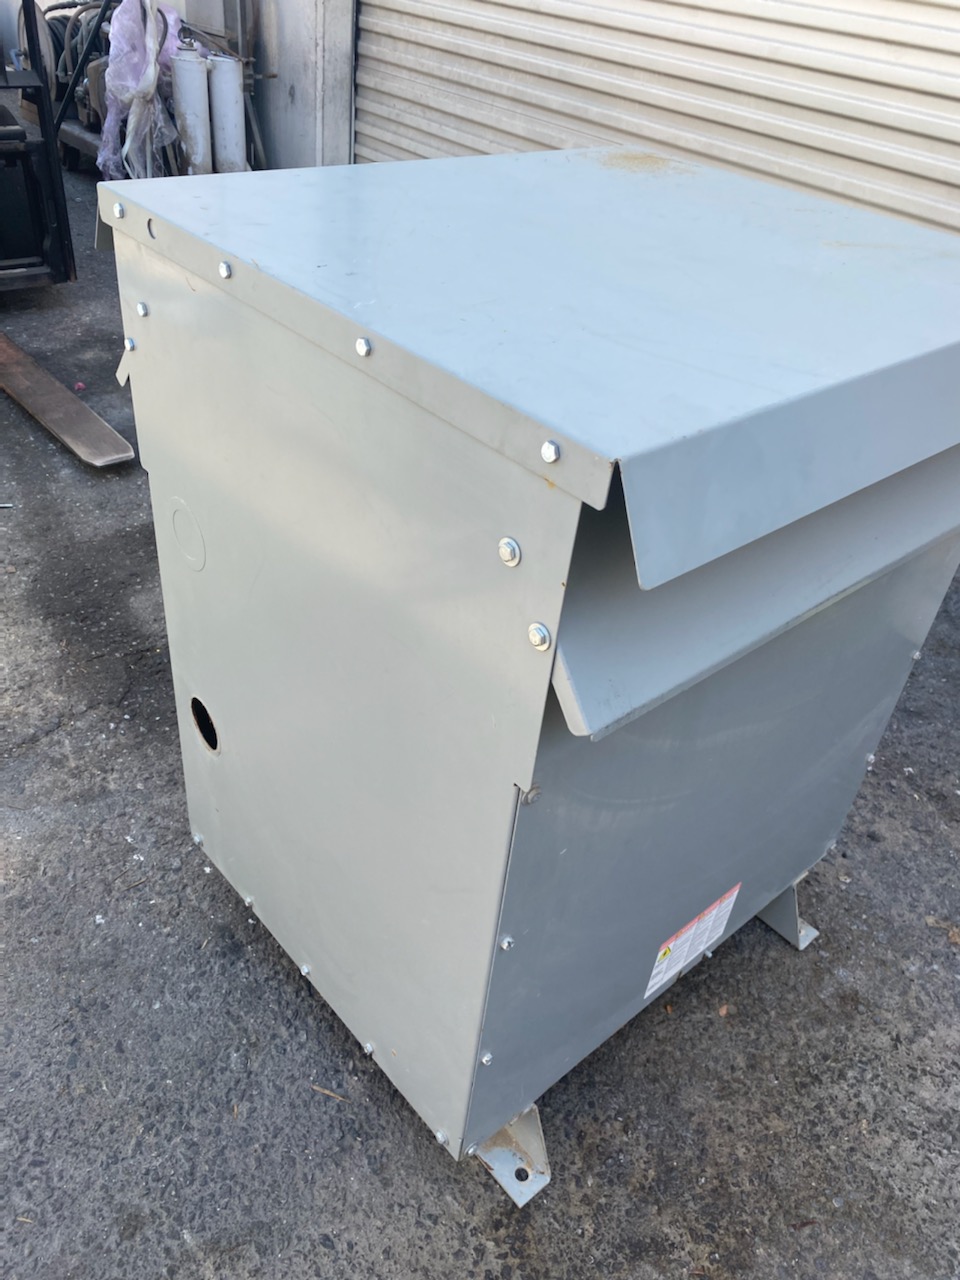 Sell Pad Mounted Transformers Near Jacksonville